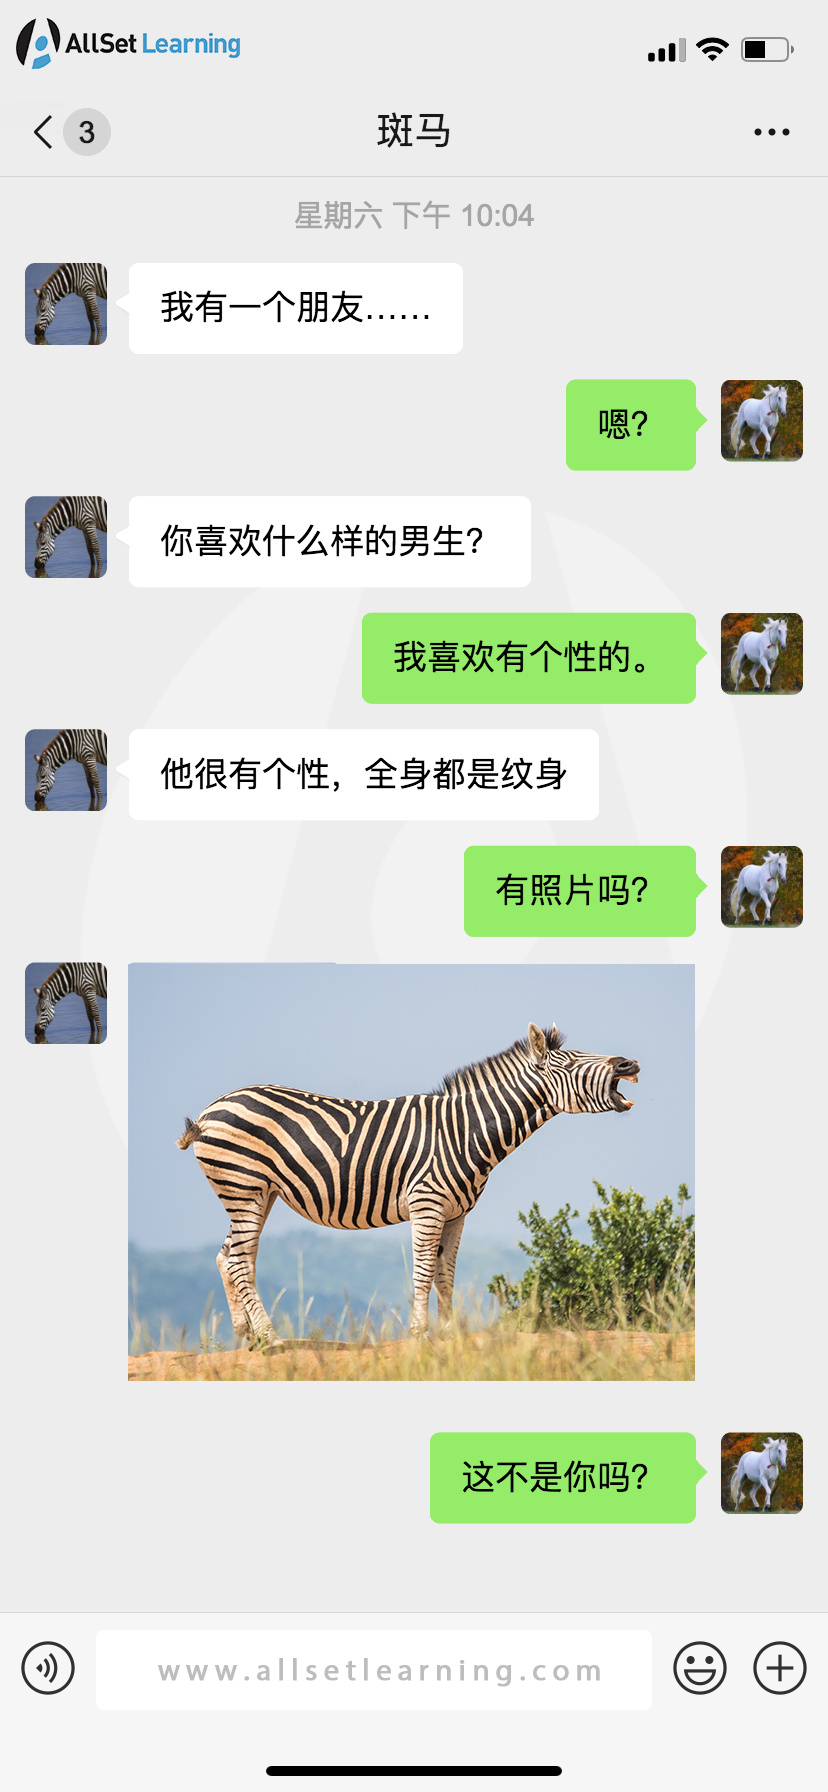 Animals Use WeChat 07 — AllSet Learning